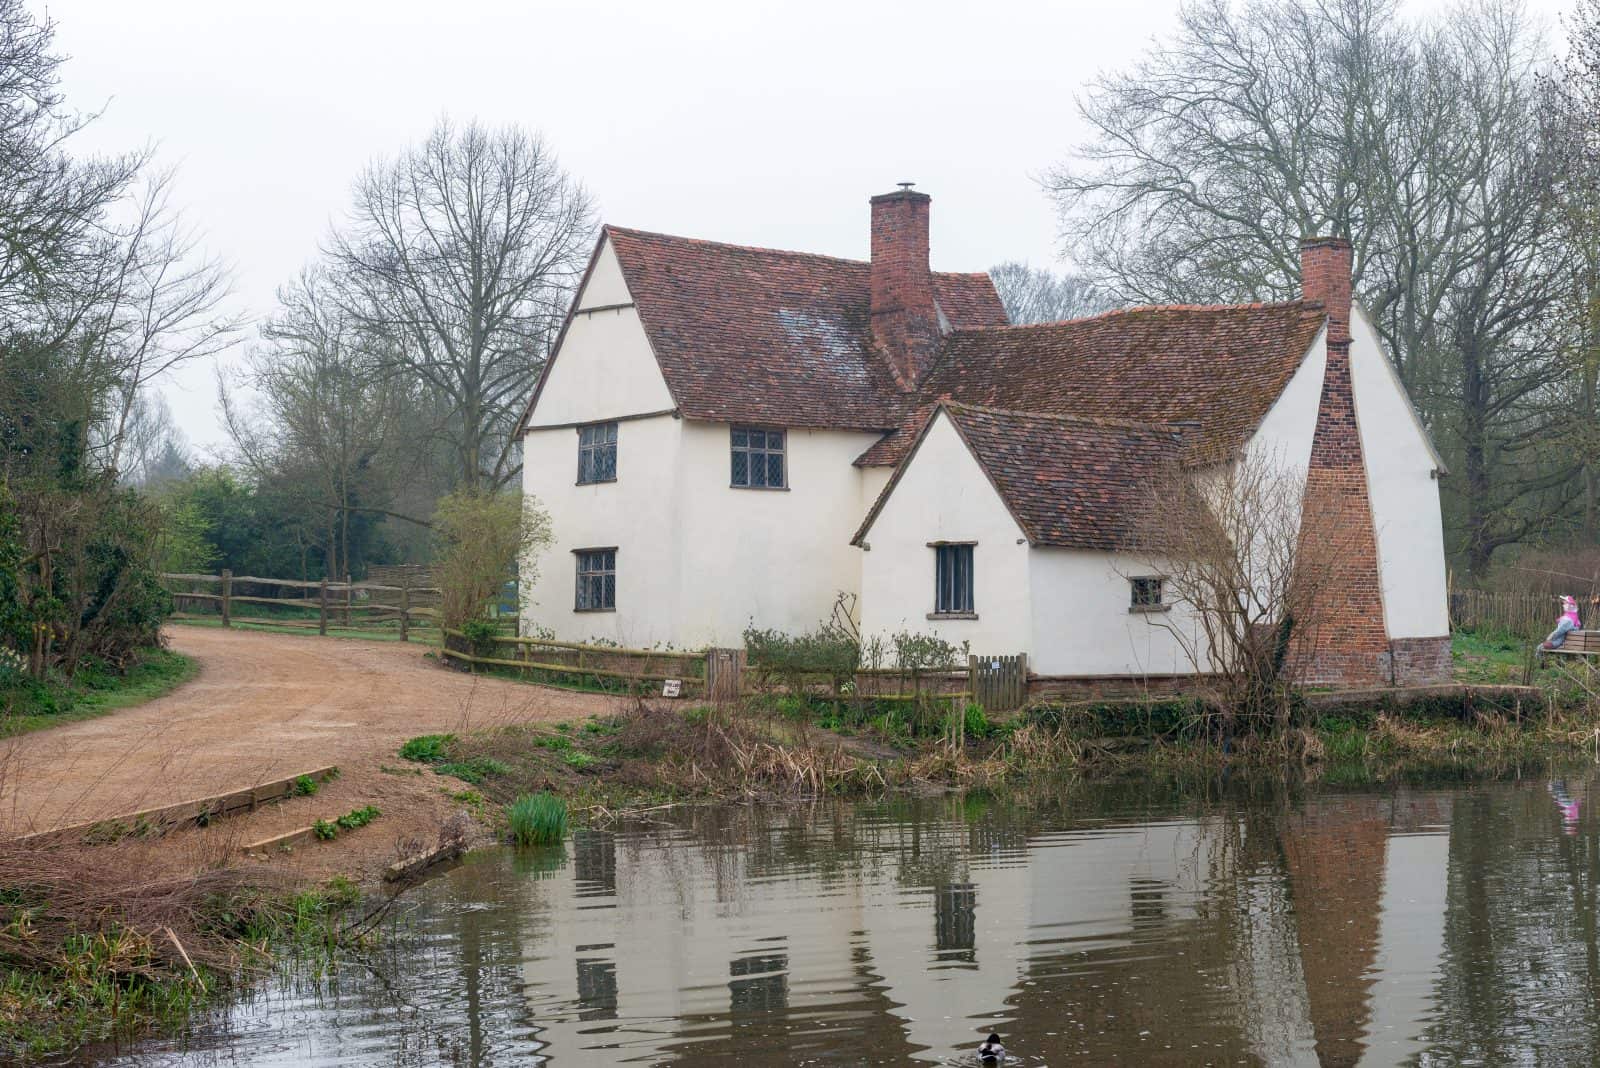 Flatford Mill's Willy Lott's Cottage